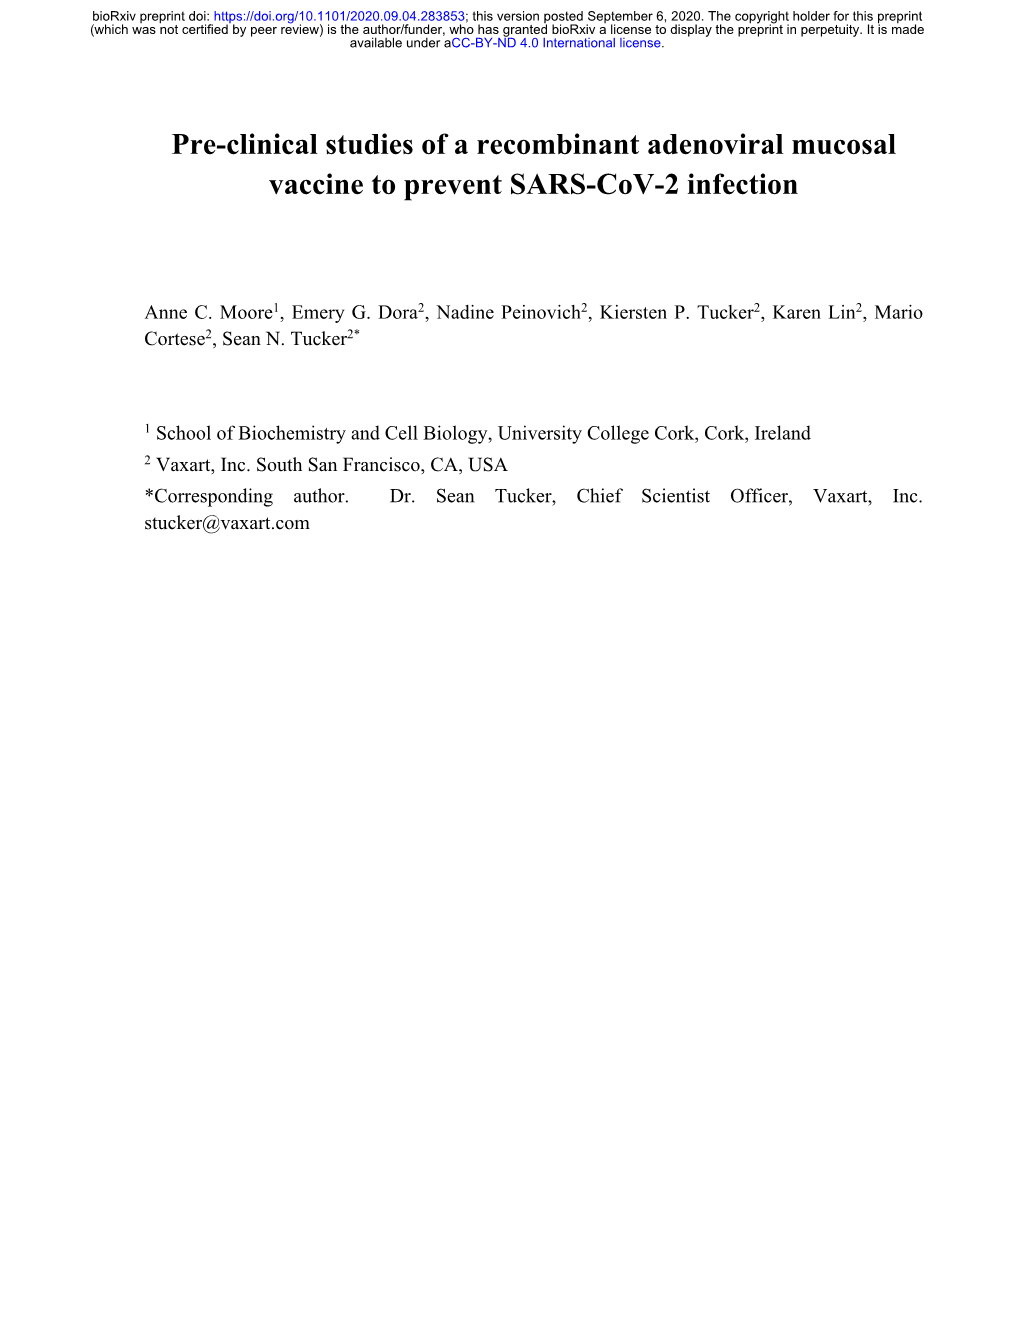 Pre-Clinical Studies of a Recombinant Adenoviral Mucosal Vaccine to Prevent SARS-Cov-2 Infection